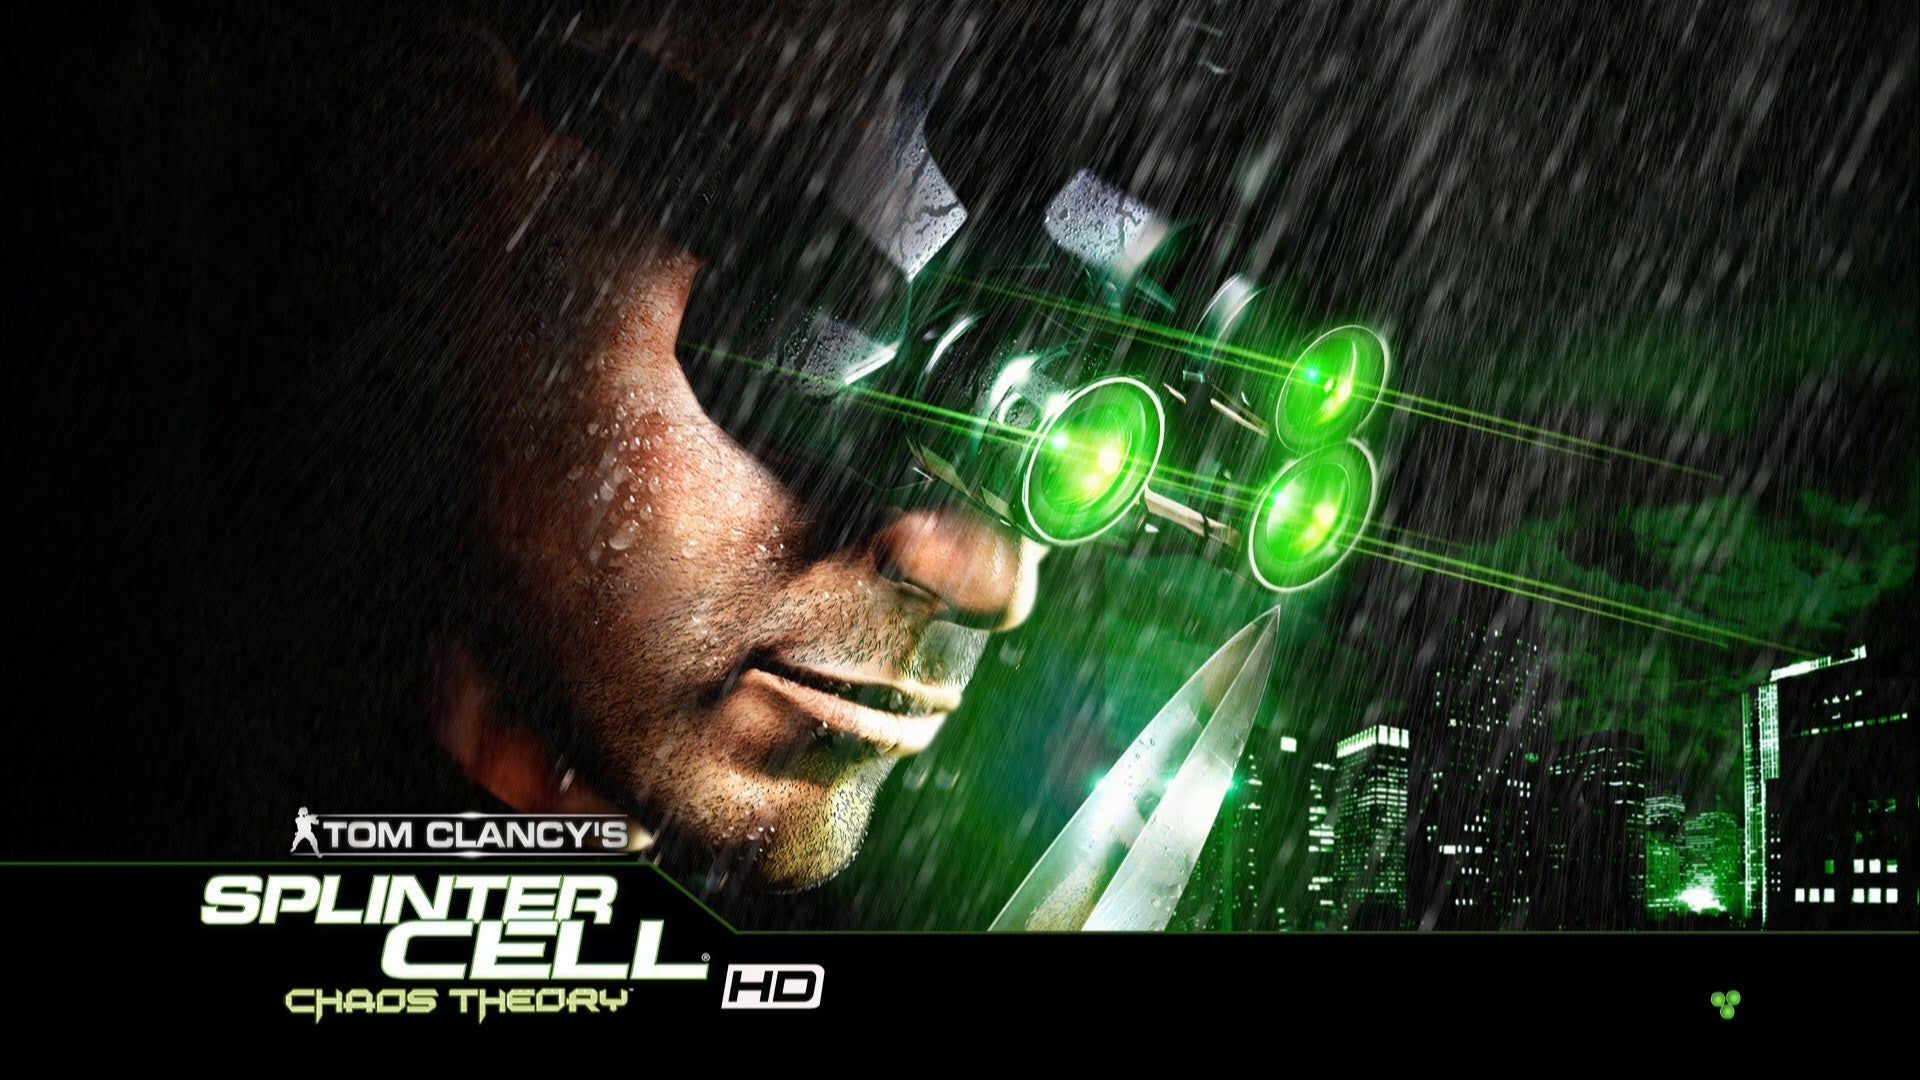 Let’s Play Tom Clancy’s Splinter Cell: Chaos Theory